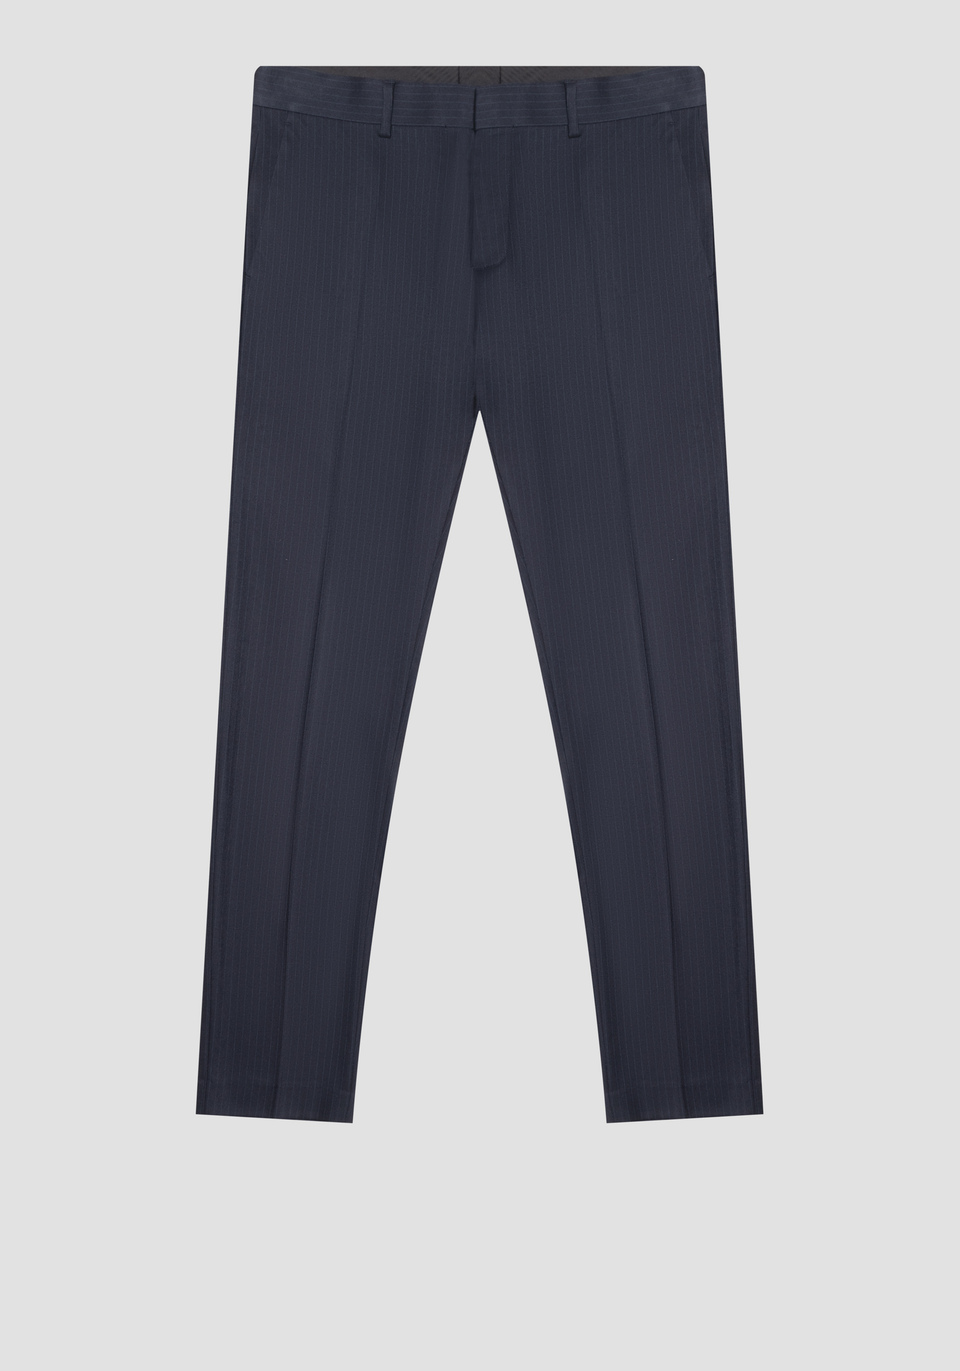 “BONNIE” SLIM-FIT TROUSERS IN VISCOSE-BLEND FABRIC WITH PINSTRIPE MOTIF - Antony Morato Online Shop